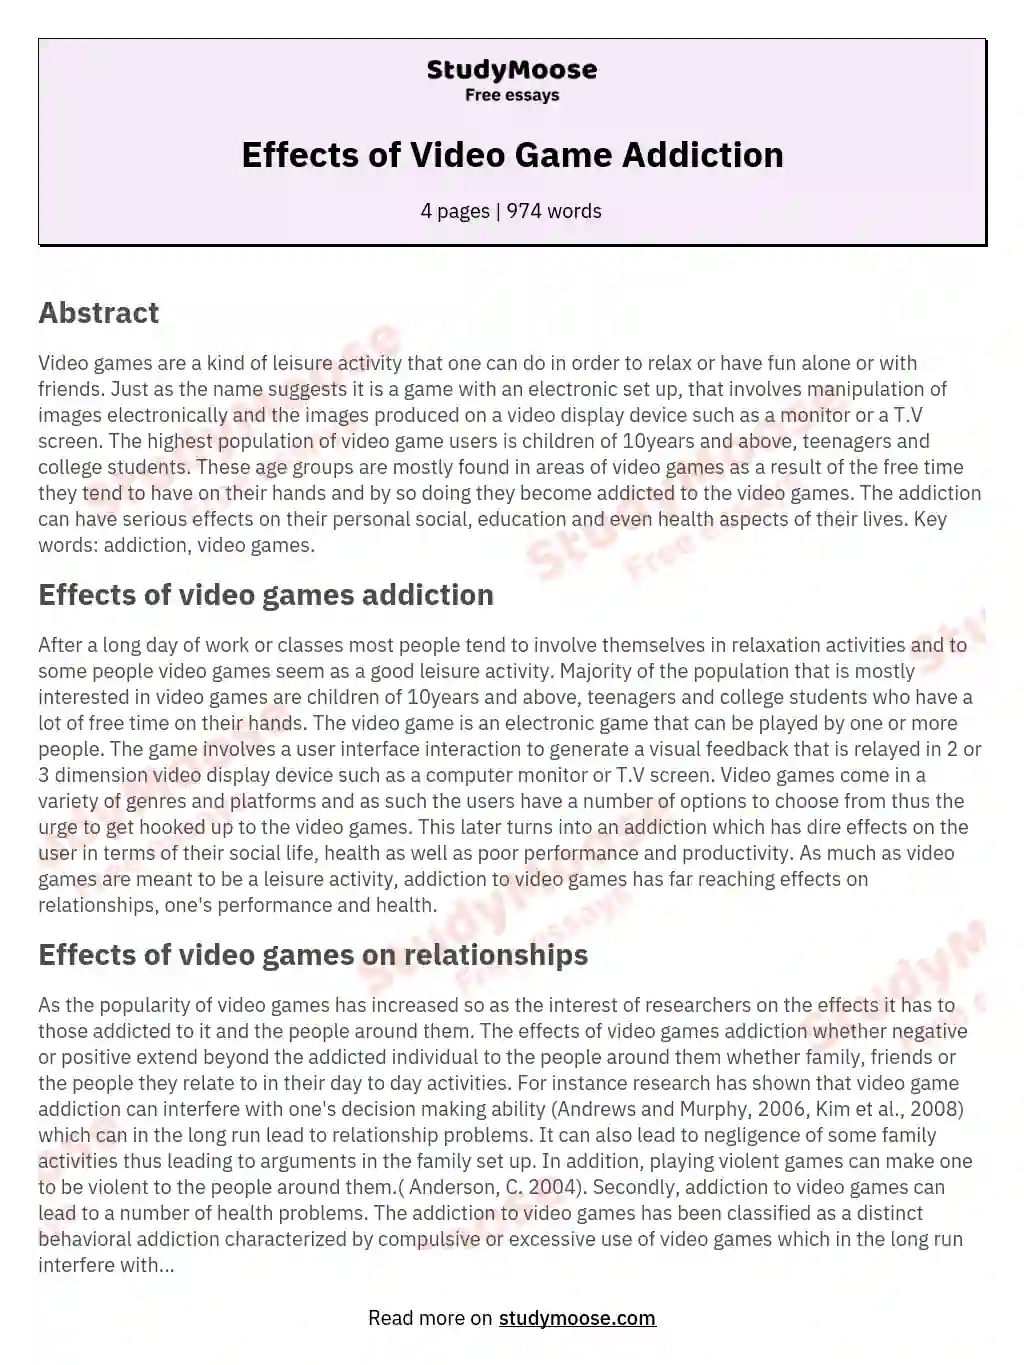 research paper about online games addiction pdf